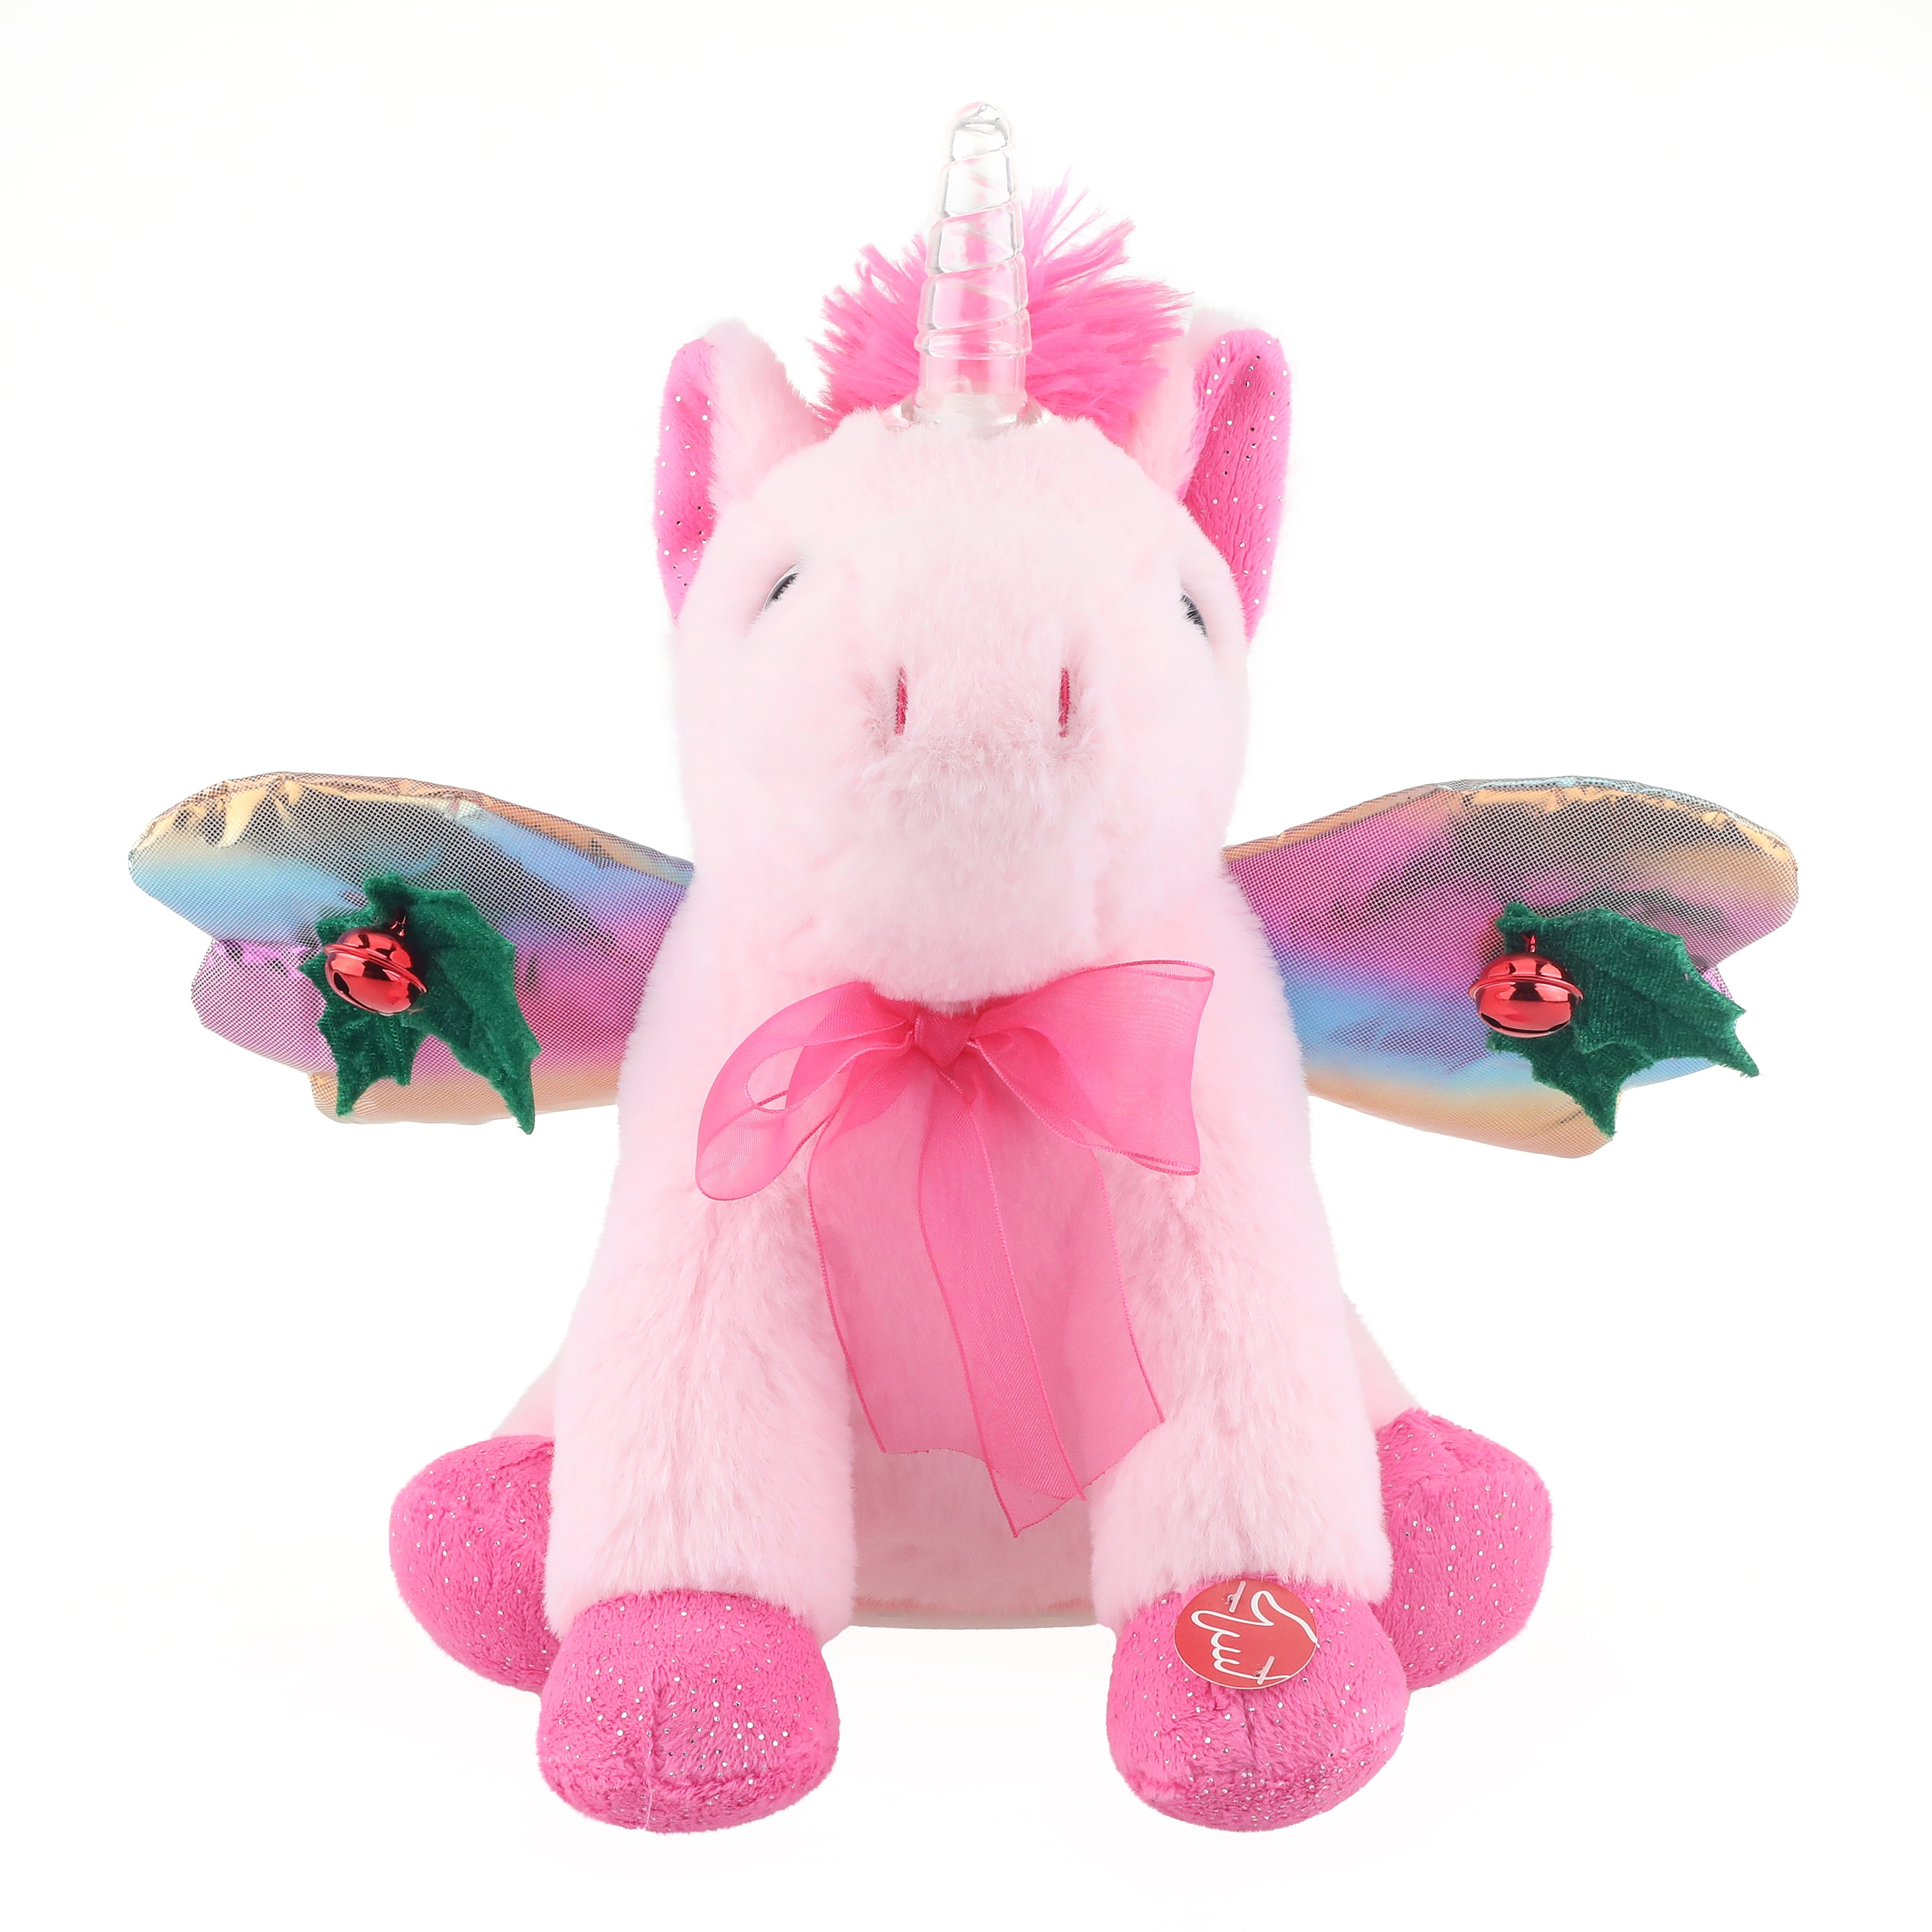 Holiday Time 8 inch Animated Light Up Pegasus Plush Toy, Pink